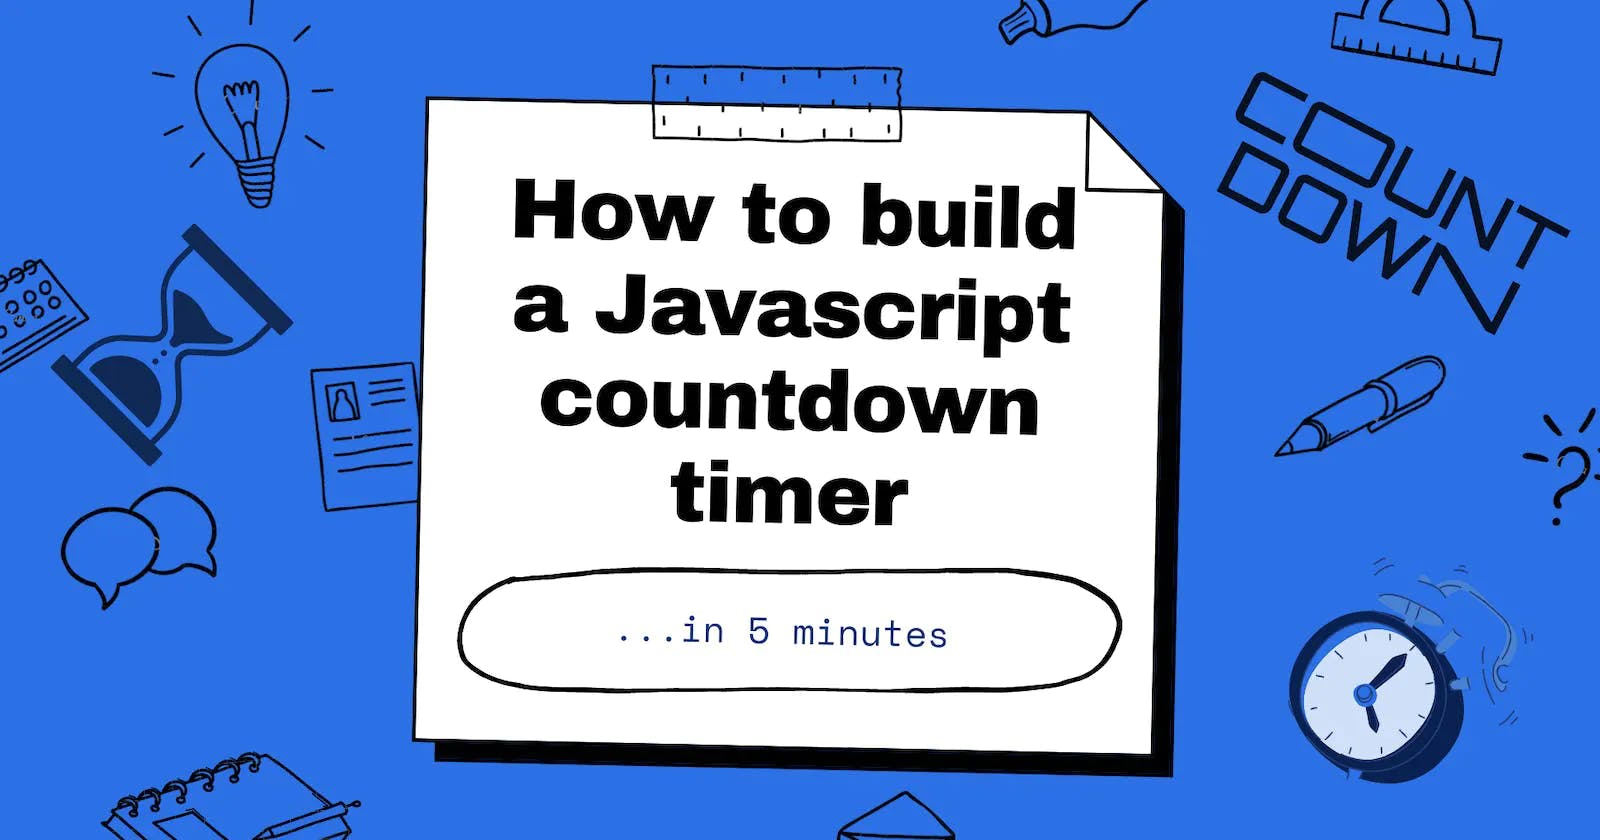 How to build a Javascript Countdown timer in 5 minutes